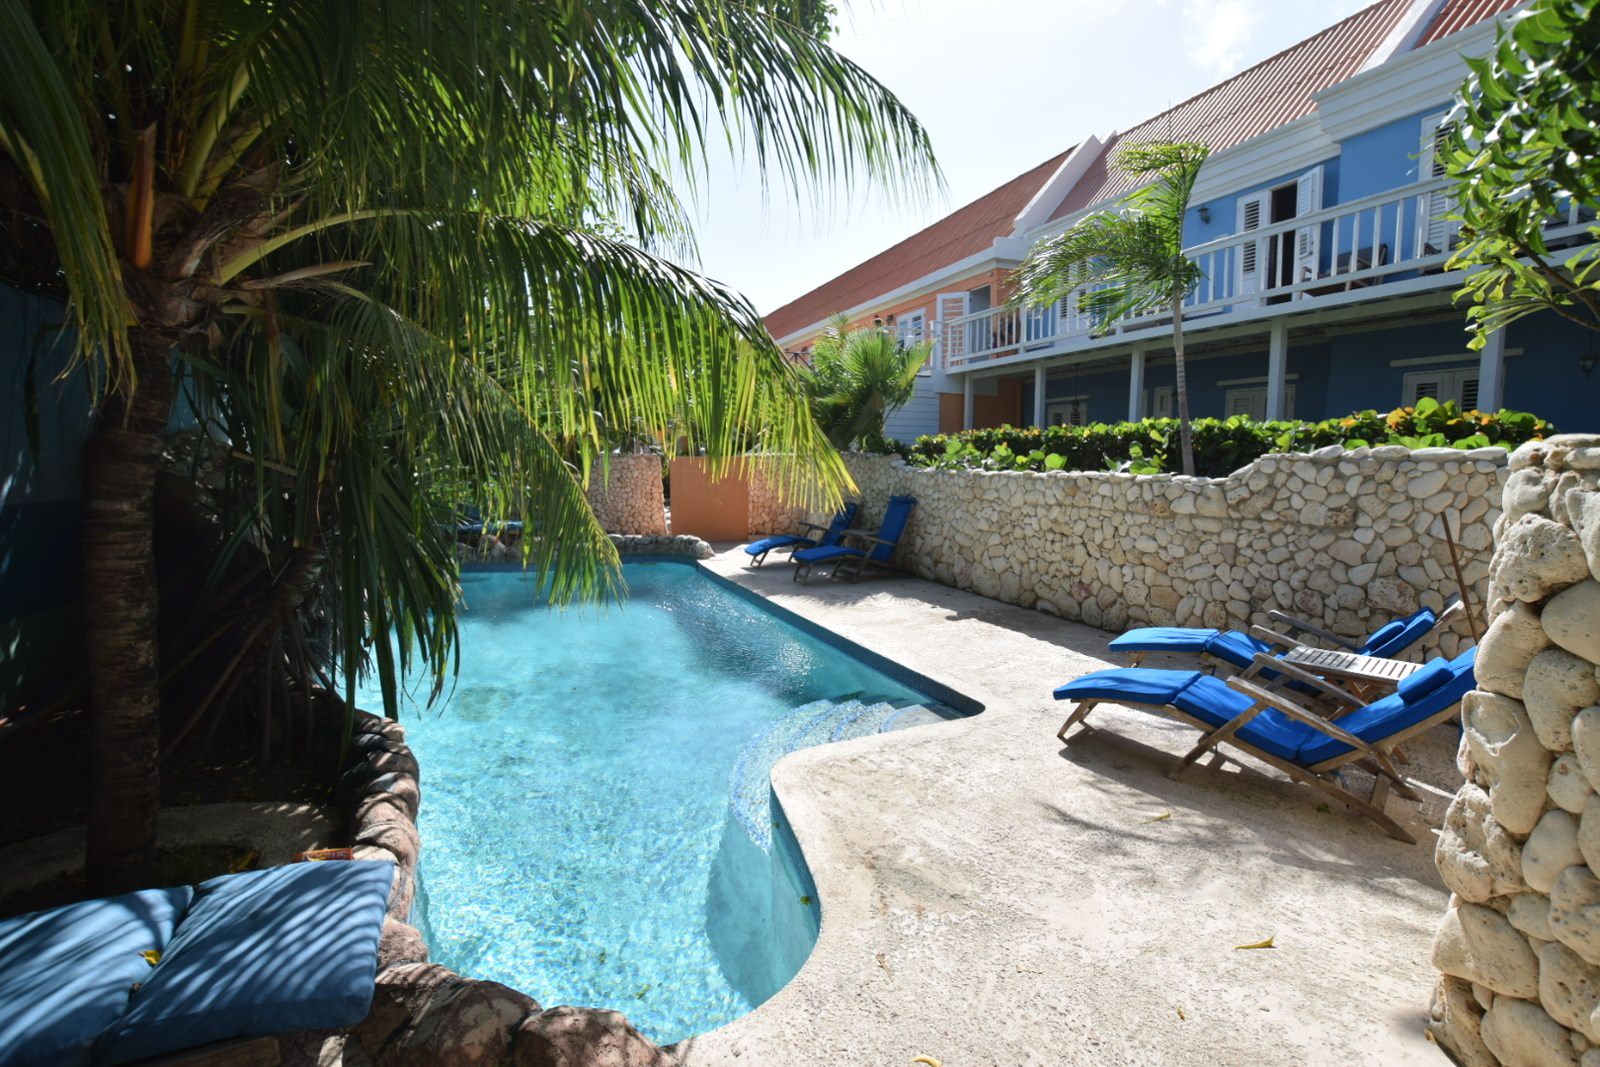 Why Scuba Lodge, Curacao is Perfect for a Caribbean Vacation